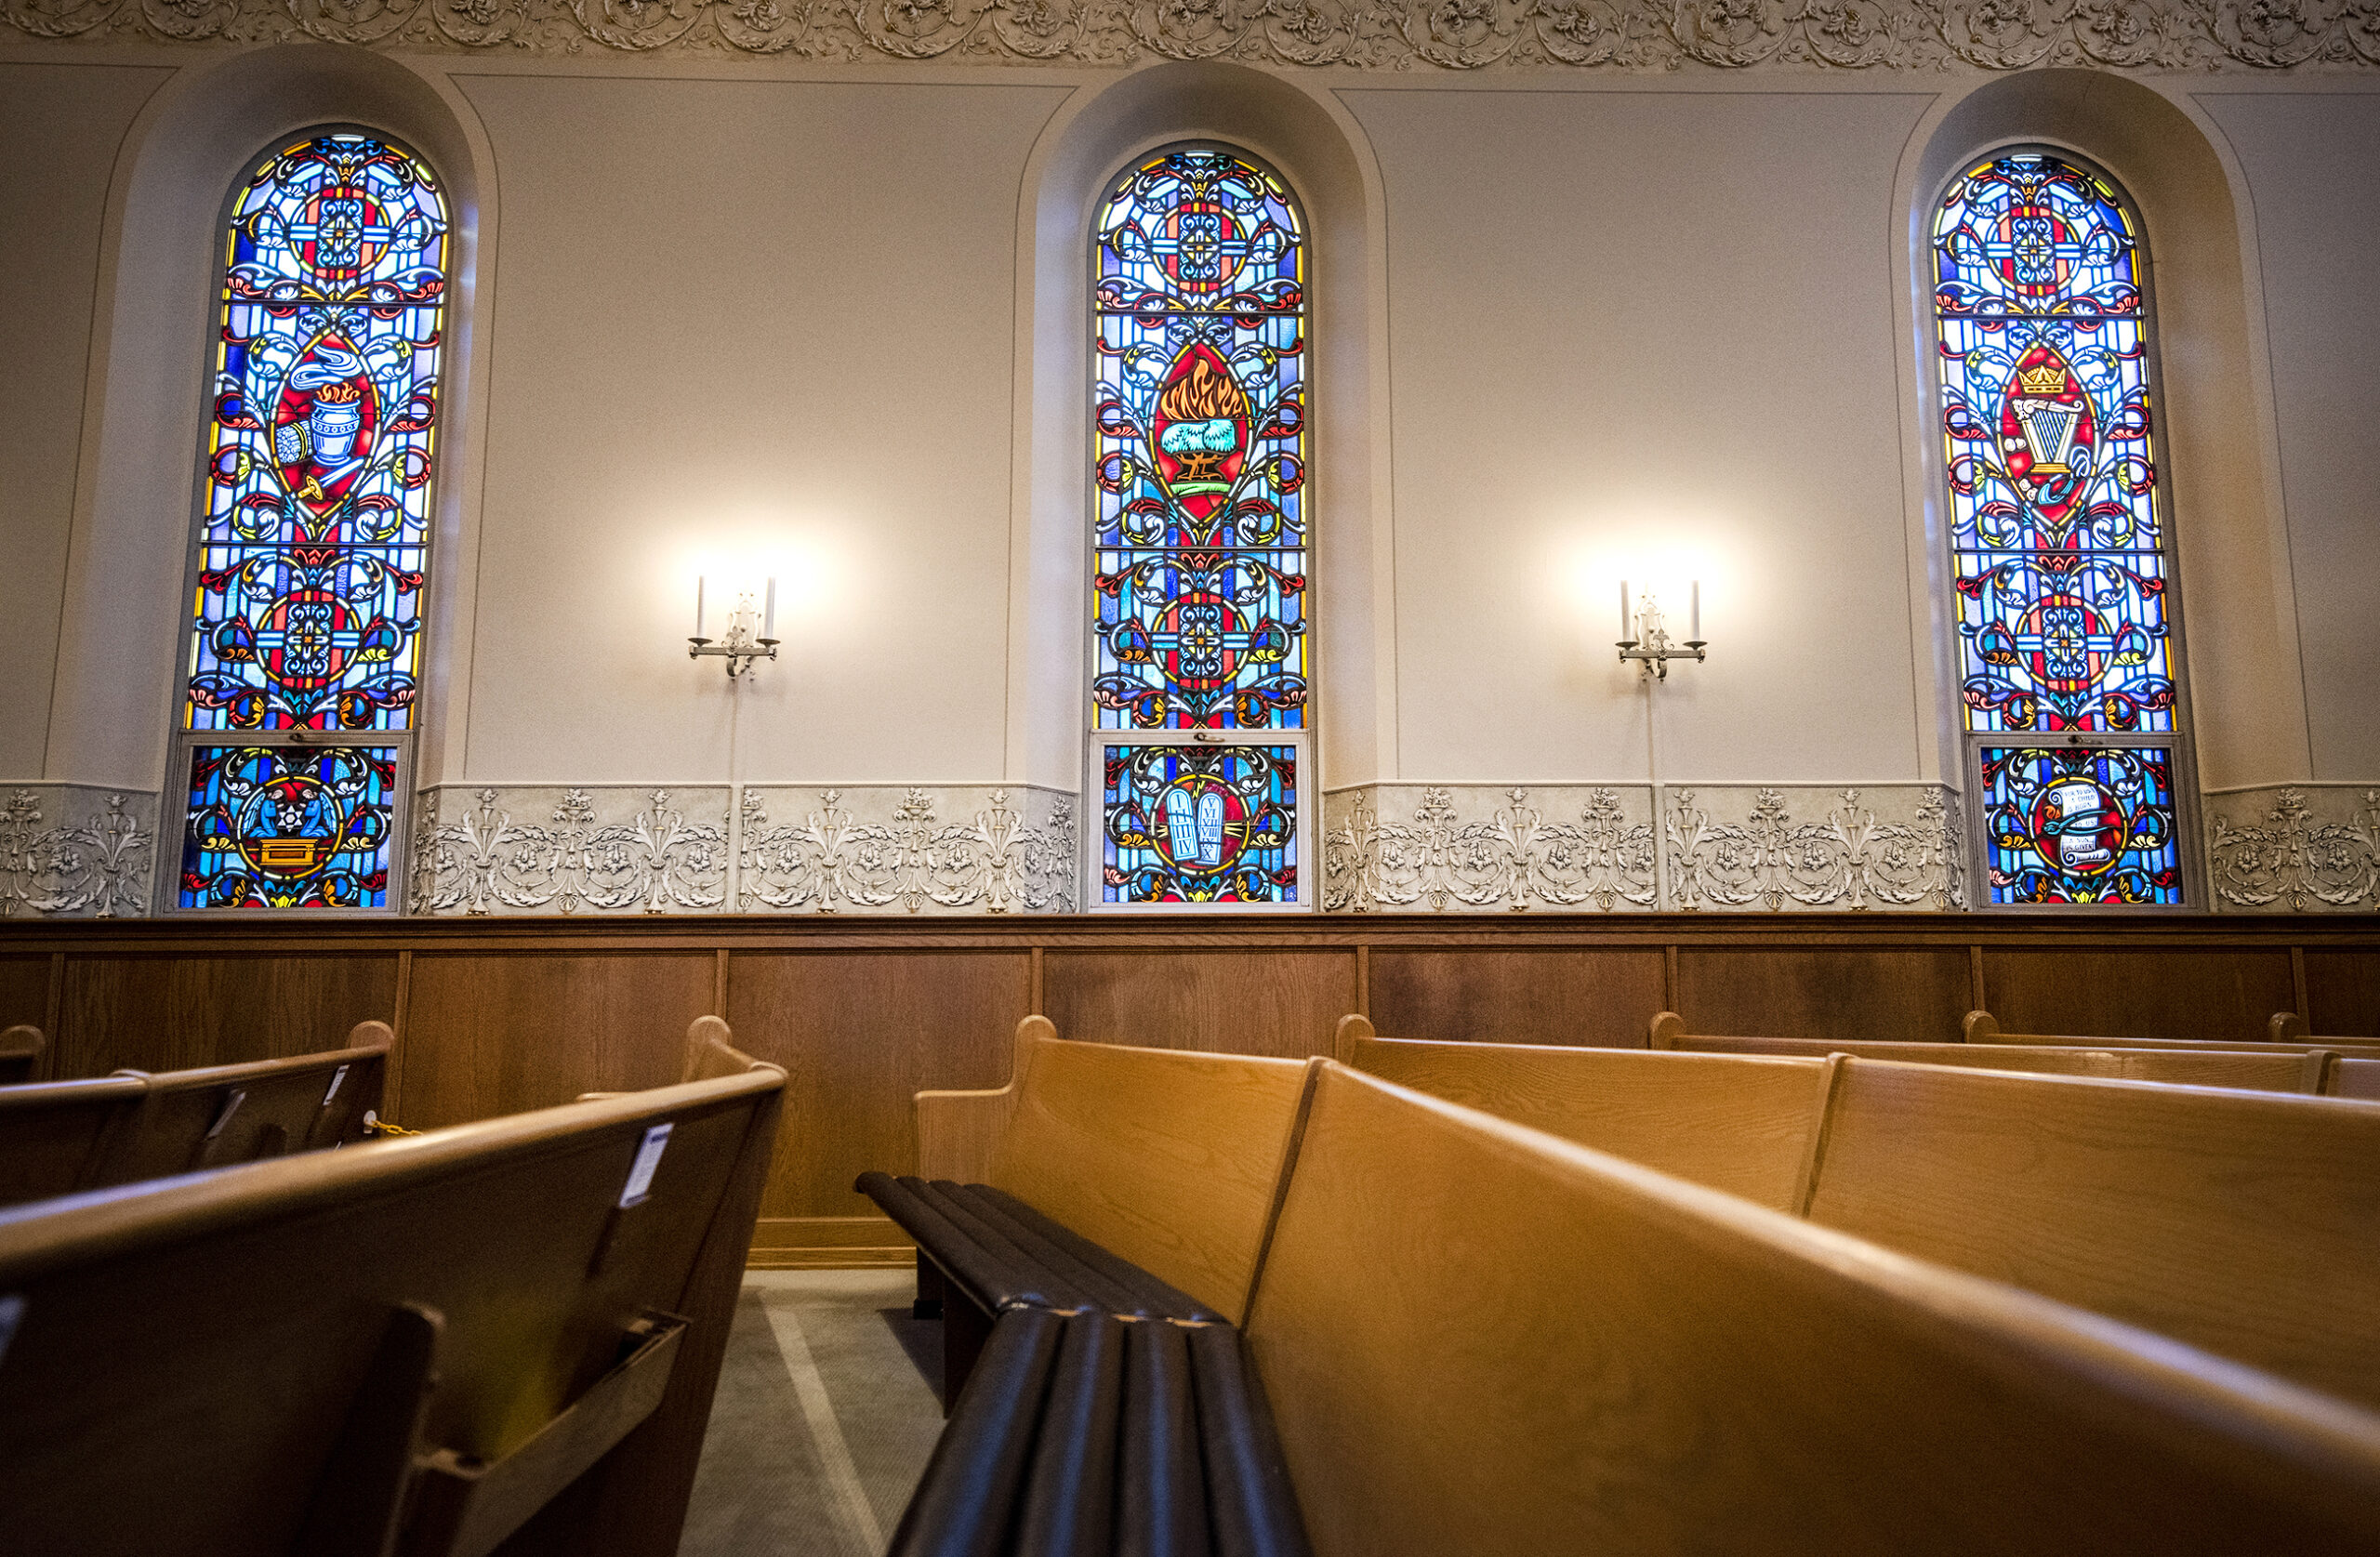 Three tall and narrow windows featuring vibrant stained glass are seen behind church pews.